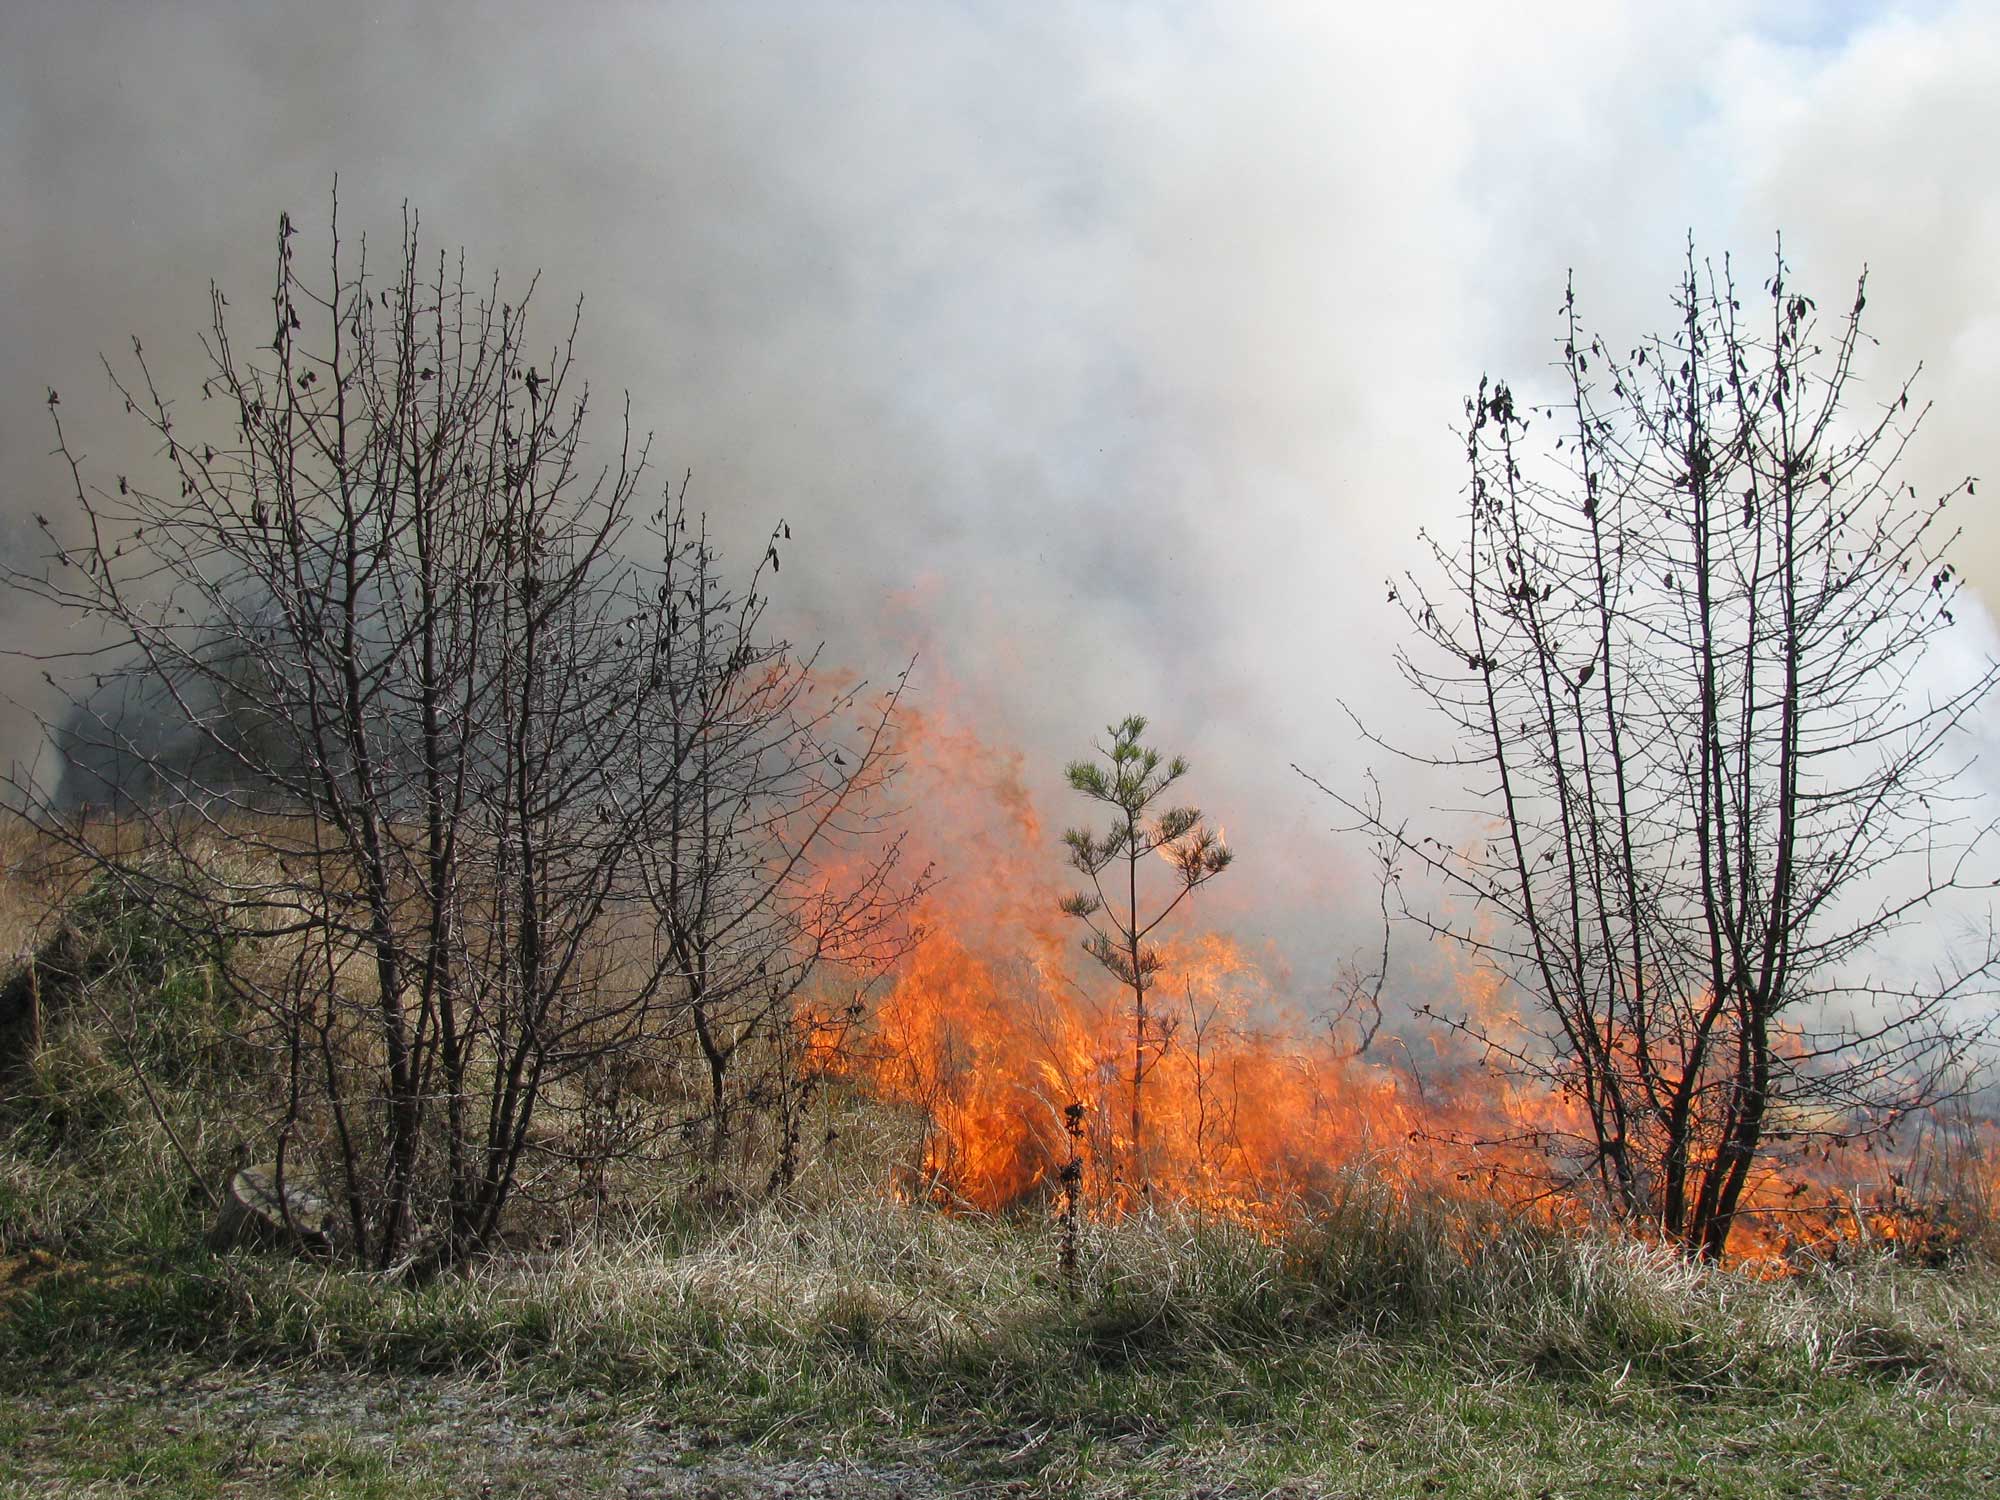 Photograph of a prescribed burn at Patuxent Research Refuge, Maryland, U.S.A. The photo shows fire consuming grass, with a small pine tree and some small leafless trees or shrubs in the foreground.